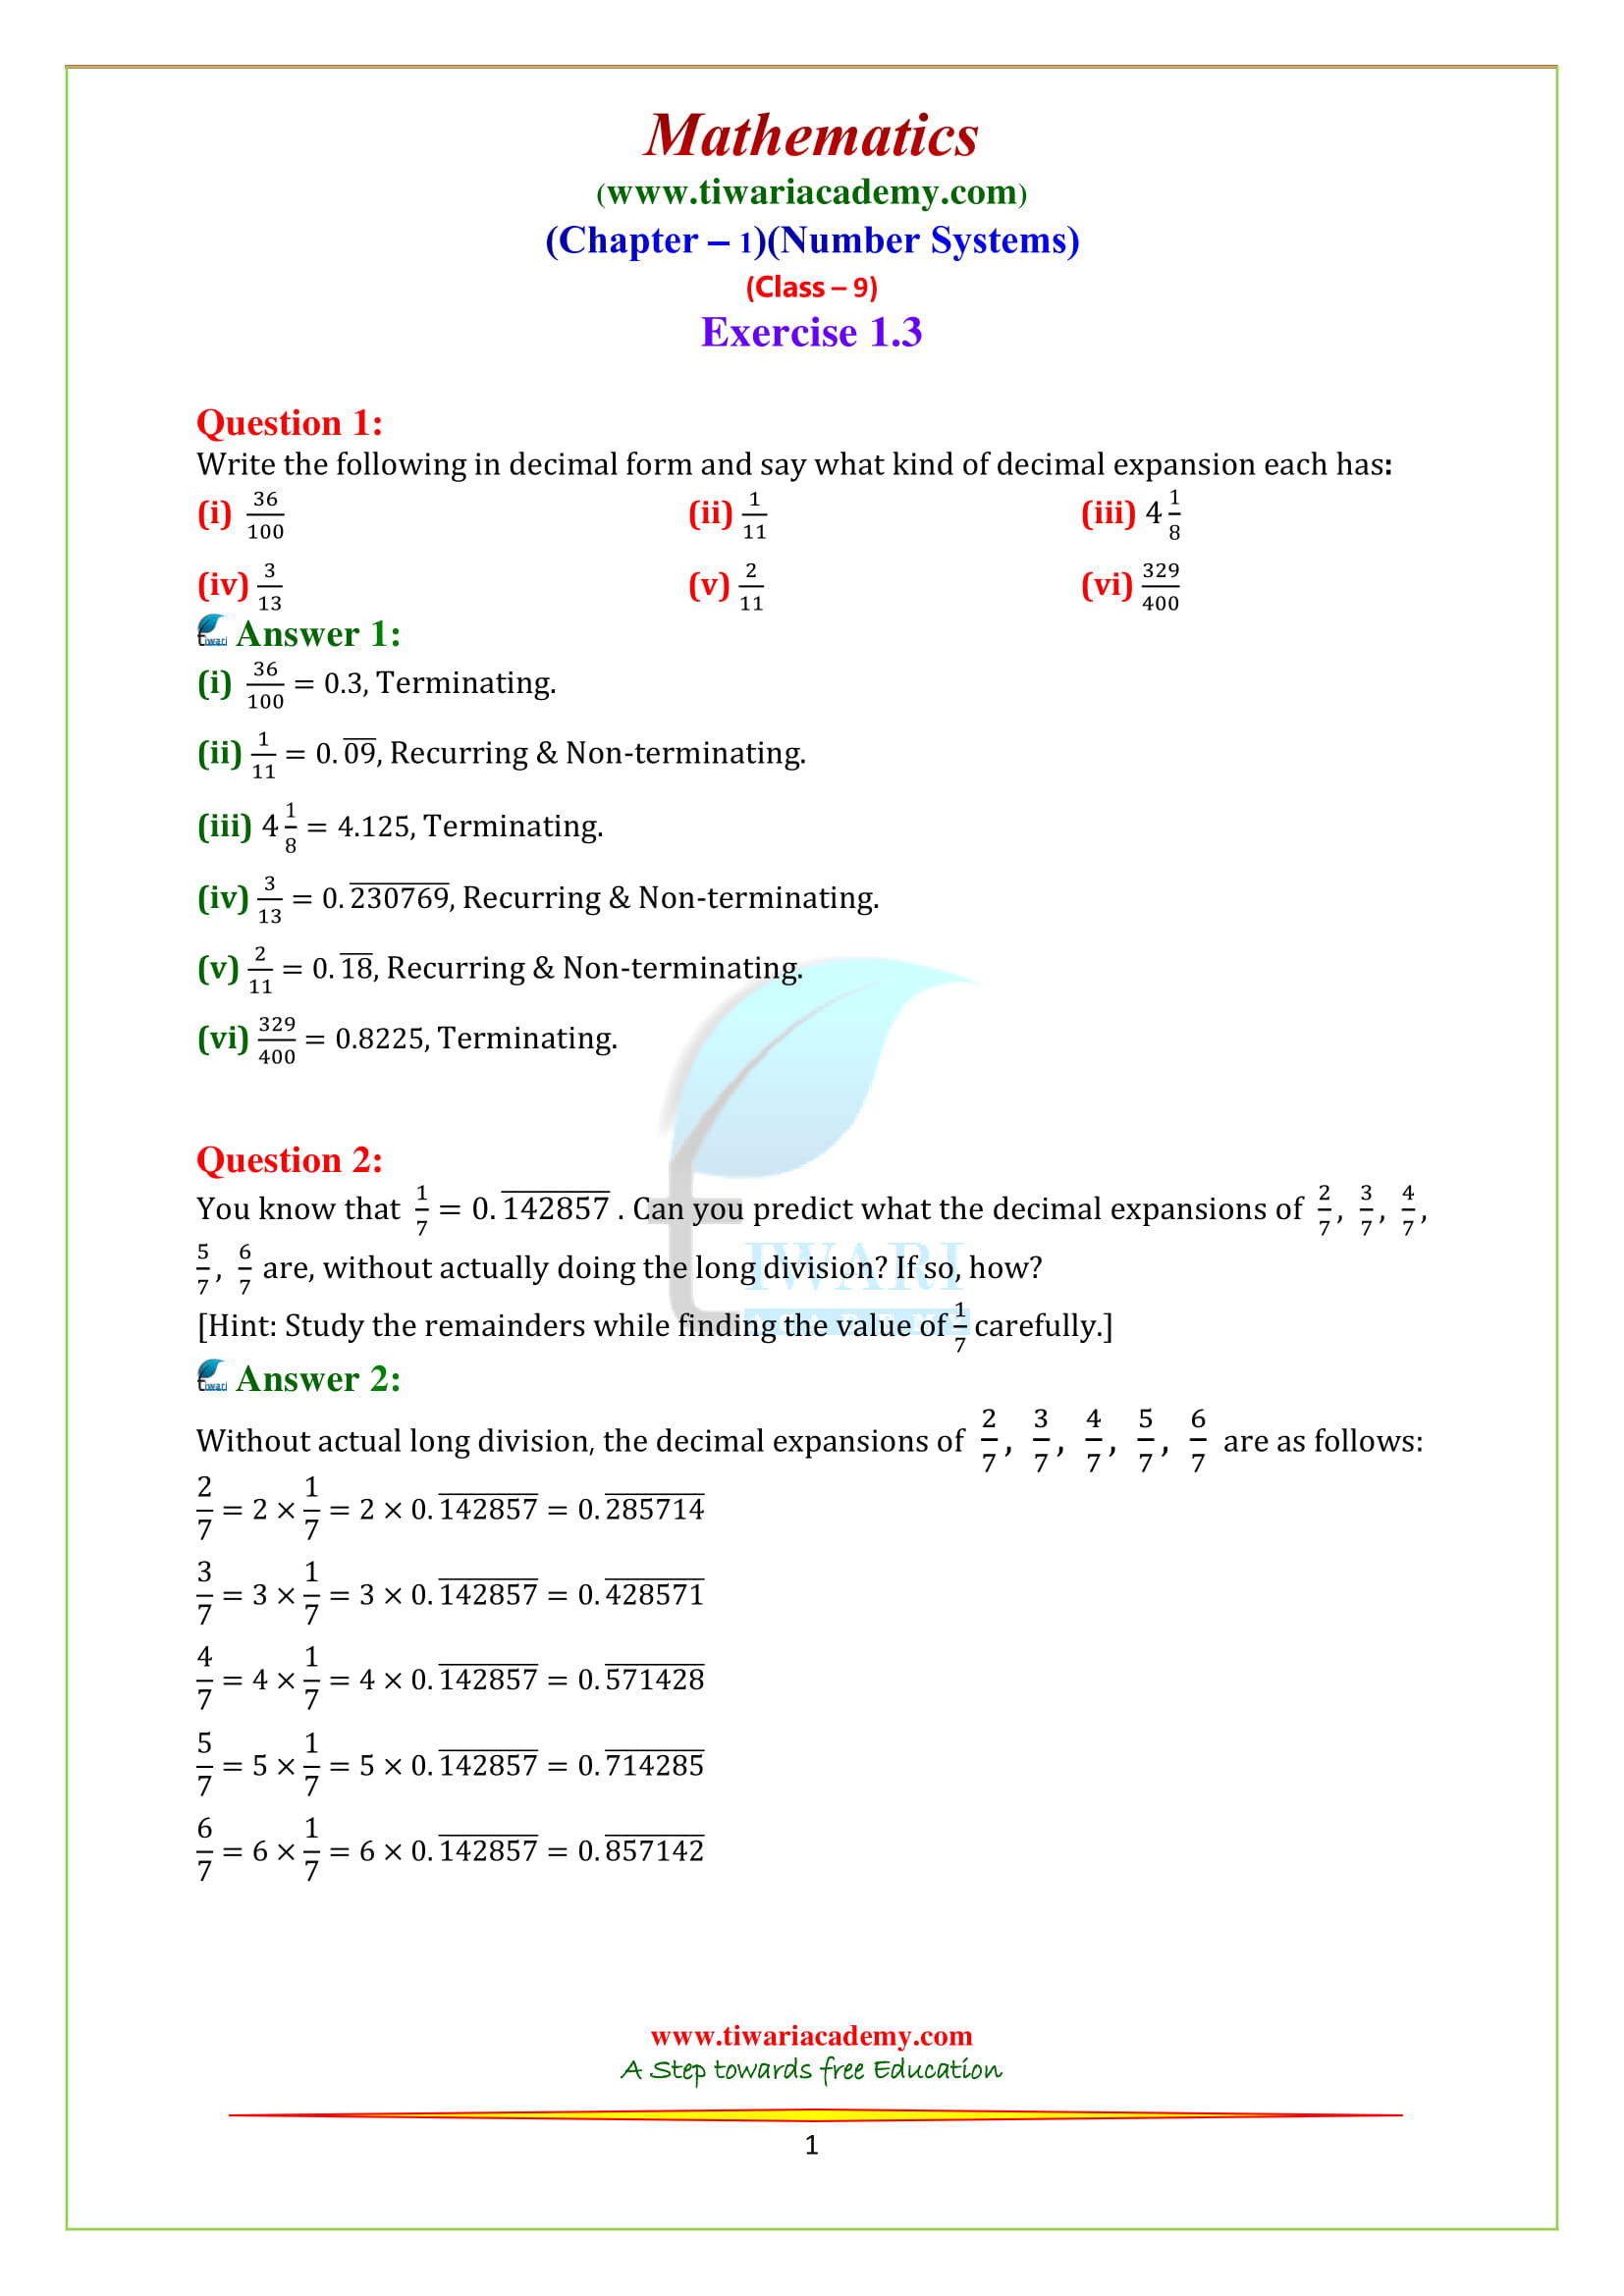 NCERT Solutions for Class 9 Chapter 1 Exercise 1.3